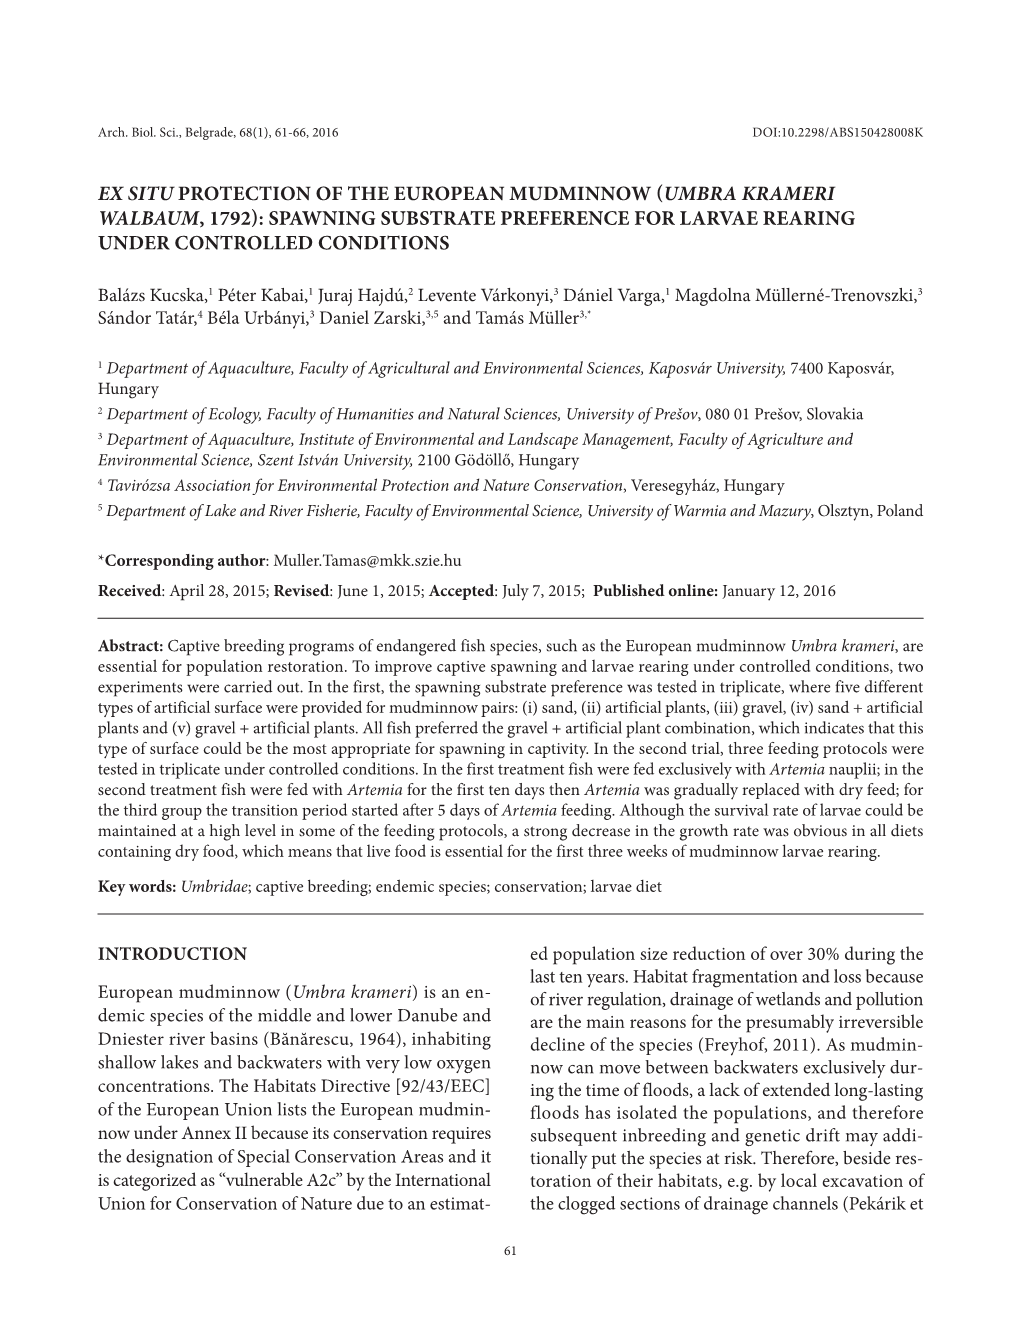 Ex Situ Protection of the European Mudminnow (Umbra Krameri Walbaum, 1792): Spawning Substrate Preference for Larvae Rearing Under Controlled Conditions